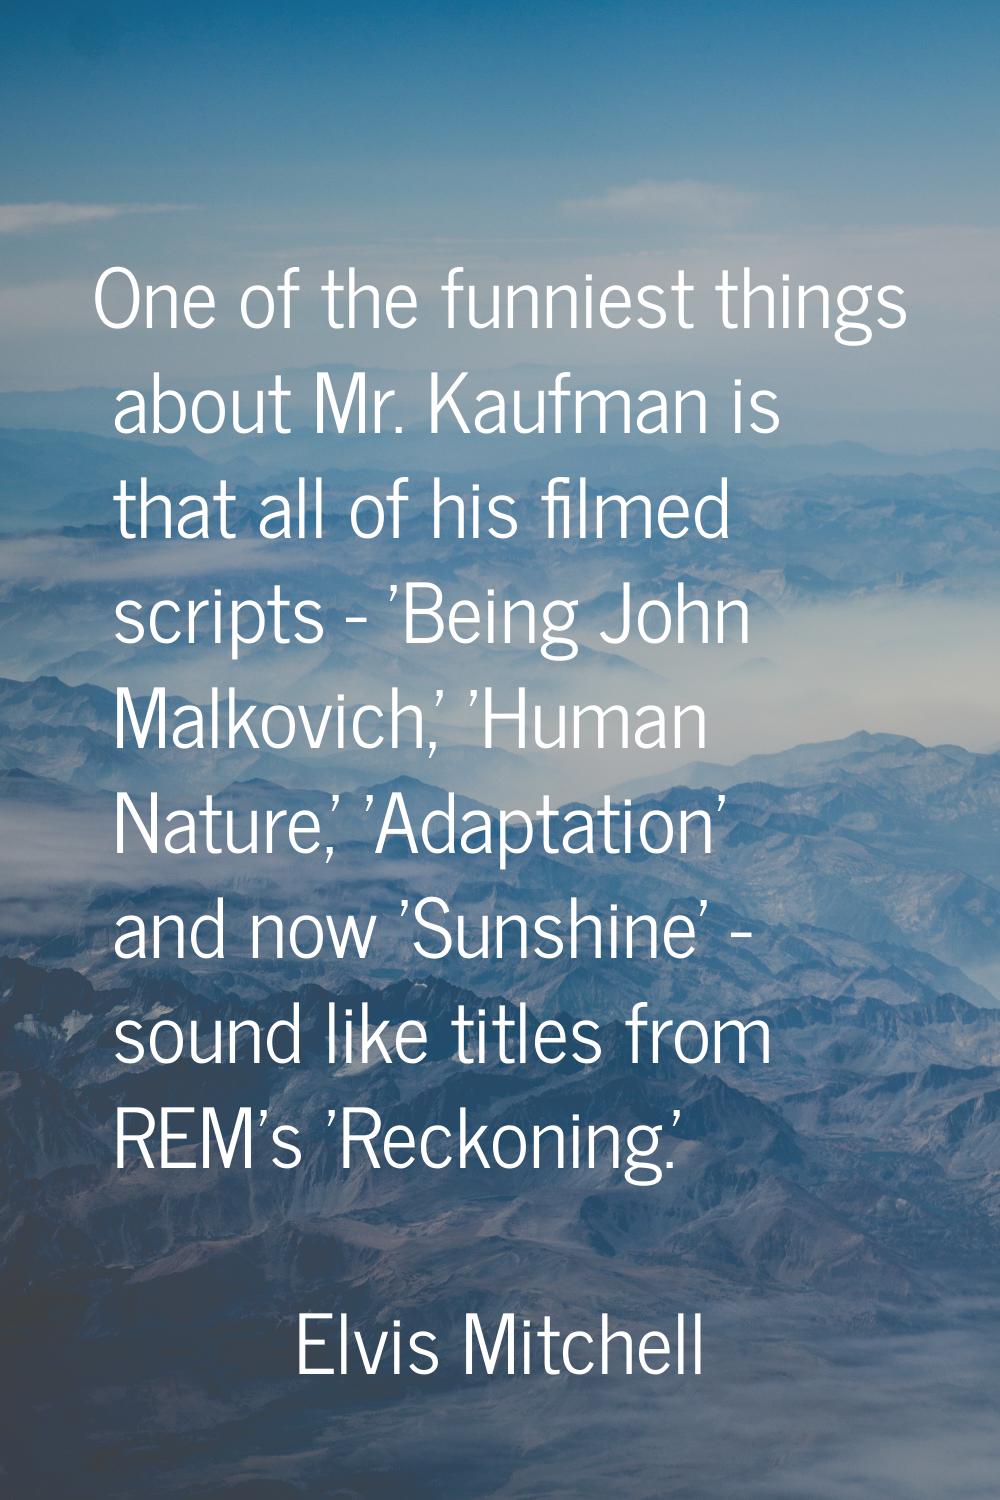 One of the funniest things about Mr. Kaufman is that all of his filmed scripts - 'Being John Malkov